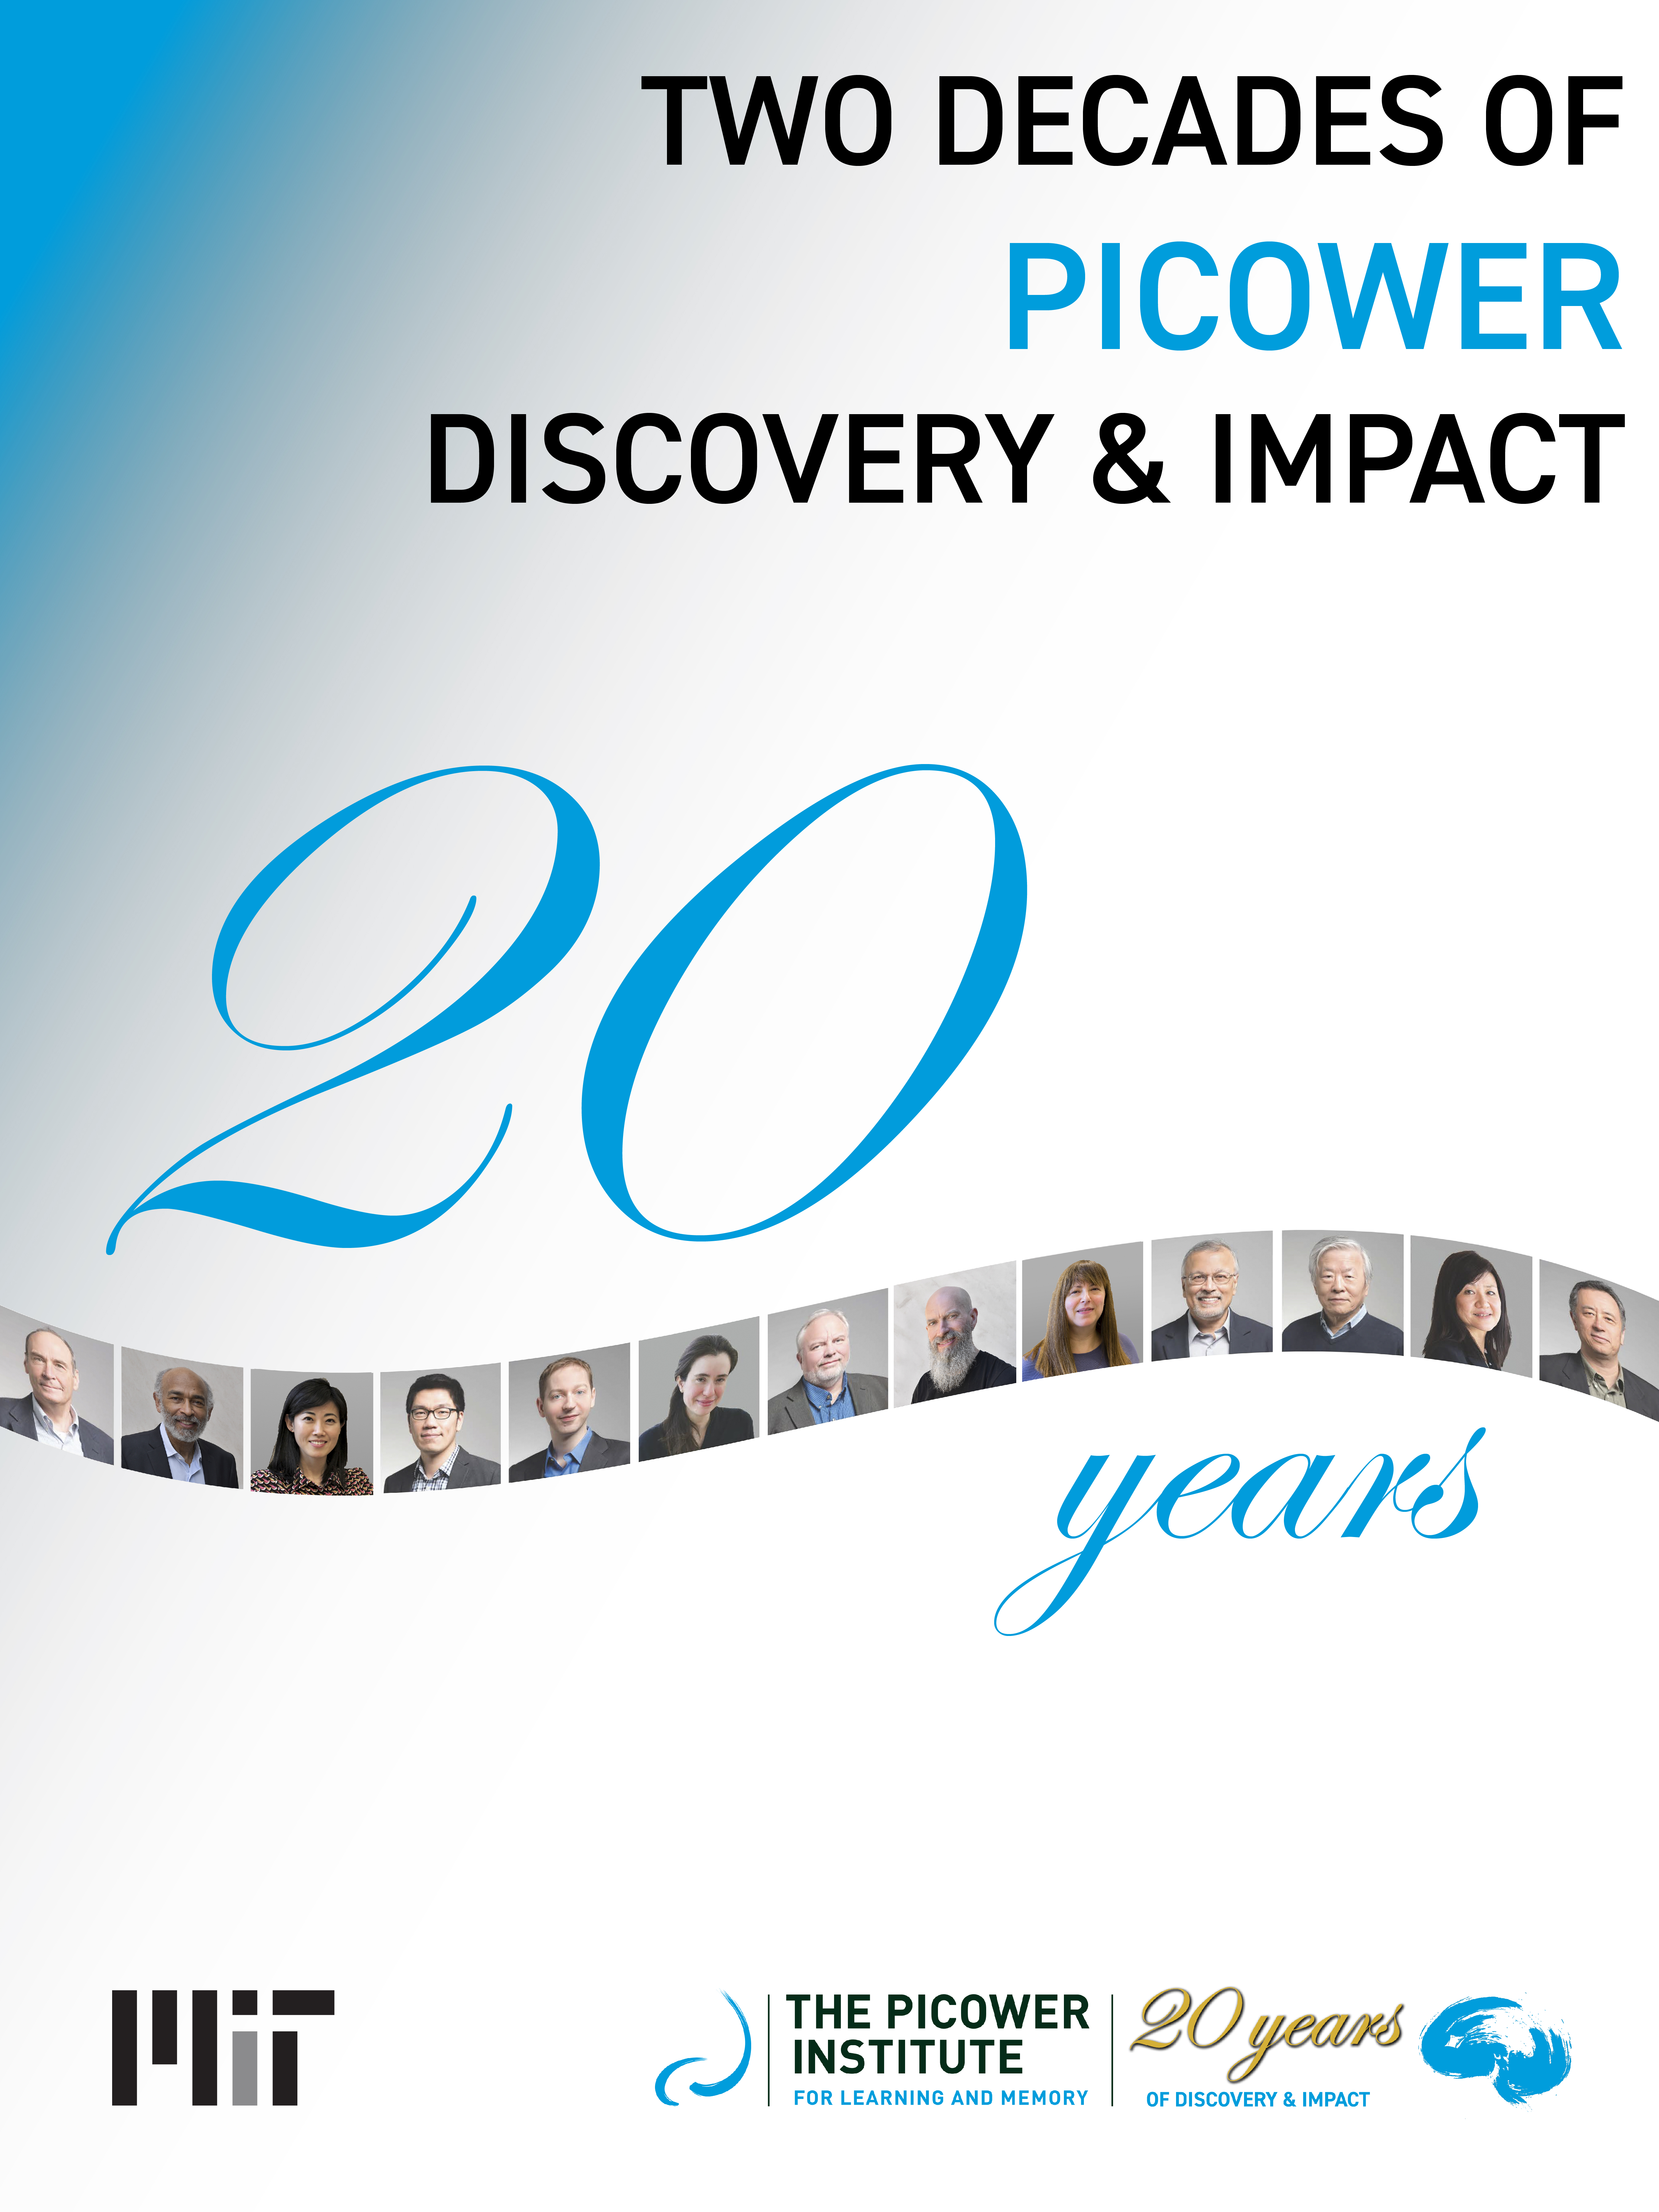 A blue and white hued poster says "Two Decades of Picower Discovery & Impact" with a large blue "20 Years" straddling a ribbon made of photos of 13 faculty members.